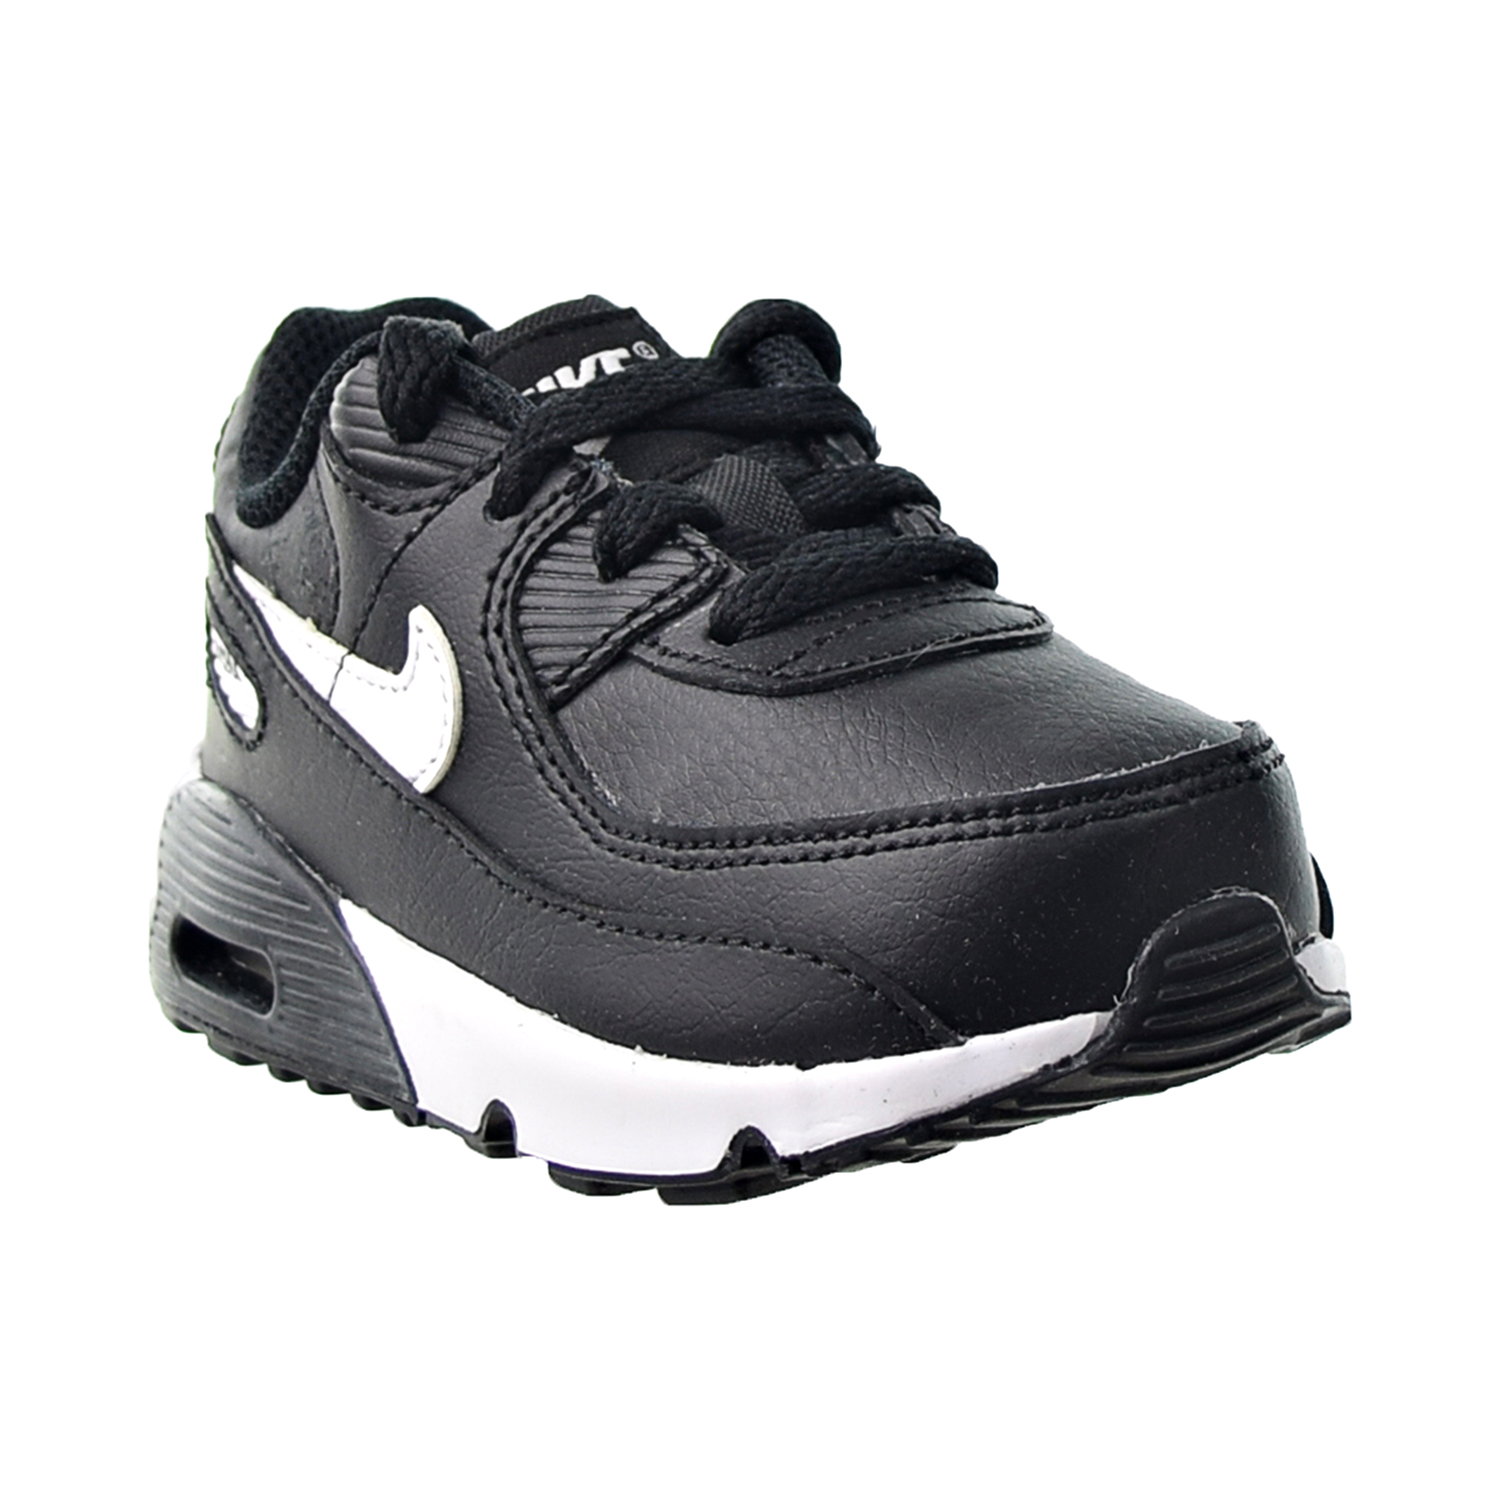 Nike Air Max 90 LTR Toddlers' Shoes Black-Black-White cd6868-010 - image 2 of 6